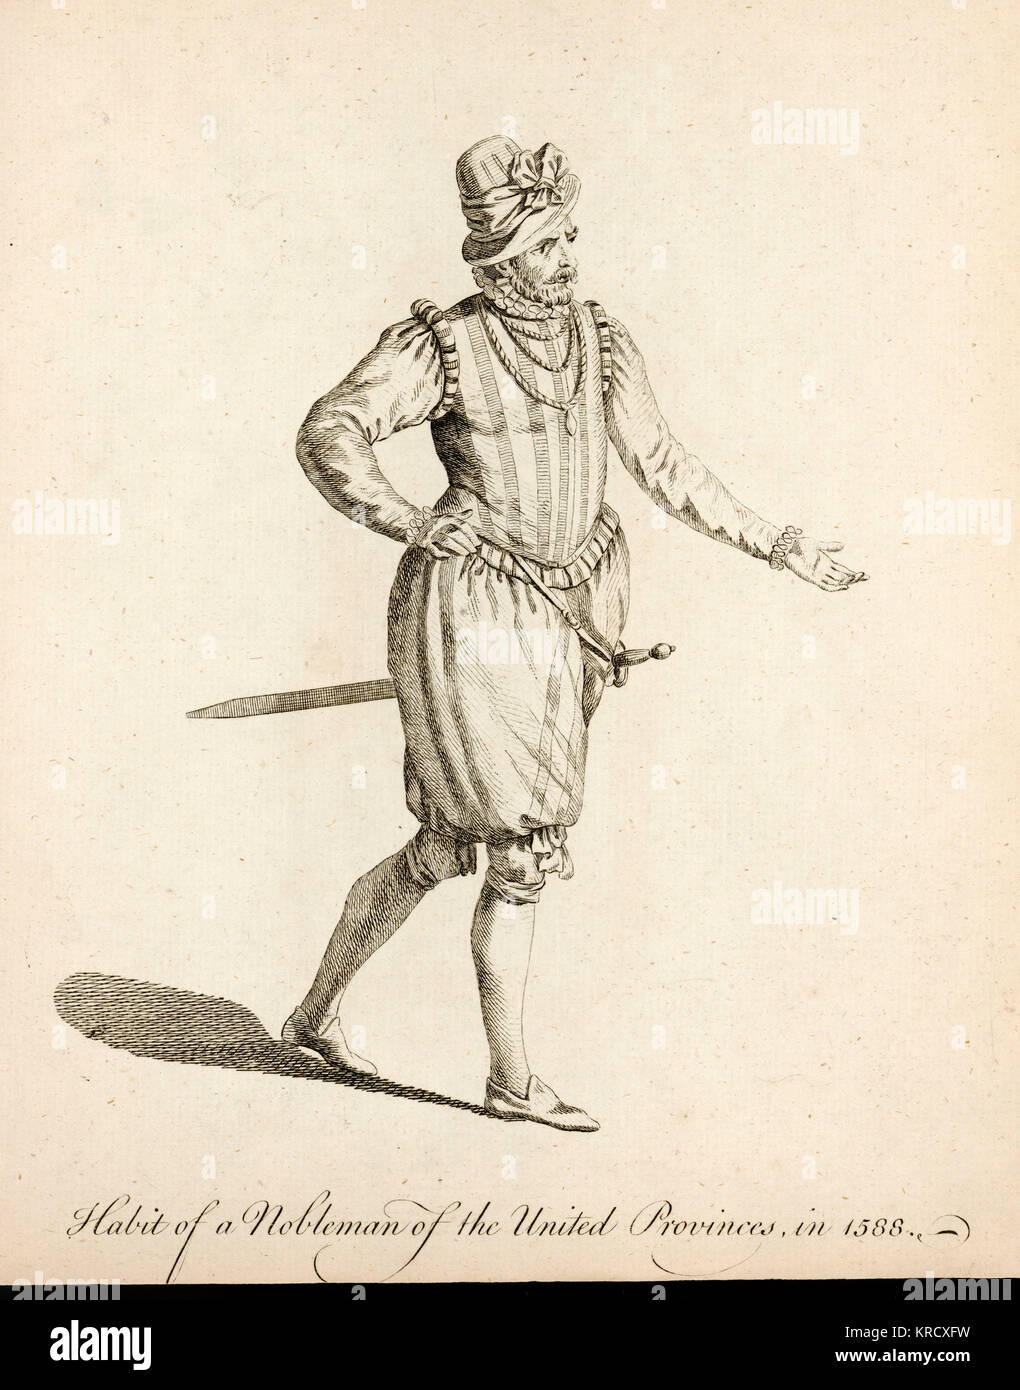 A nobleman of the United  Provinces, now known as the  Netherlands.        Date: 1588 Stock Photo